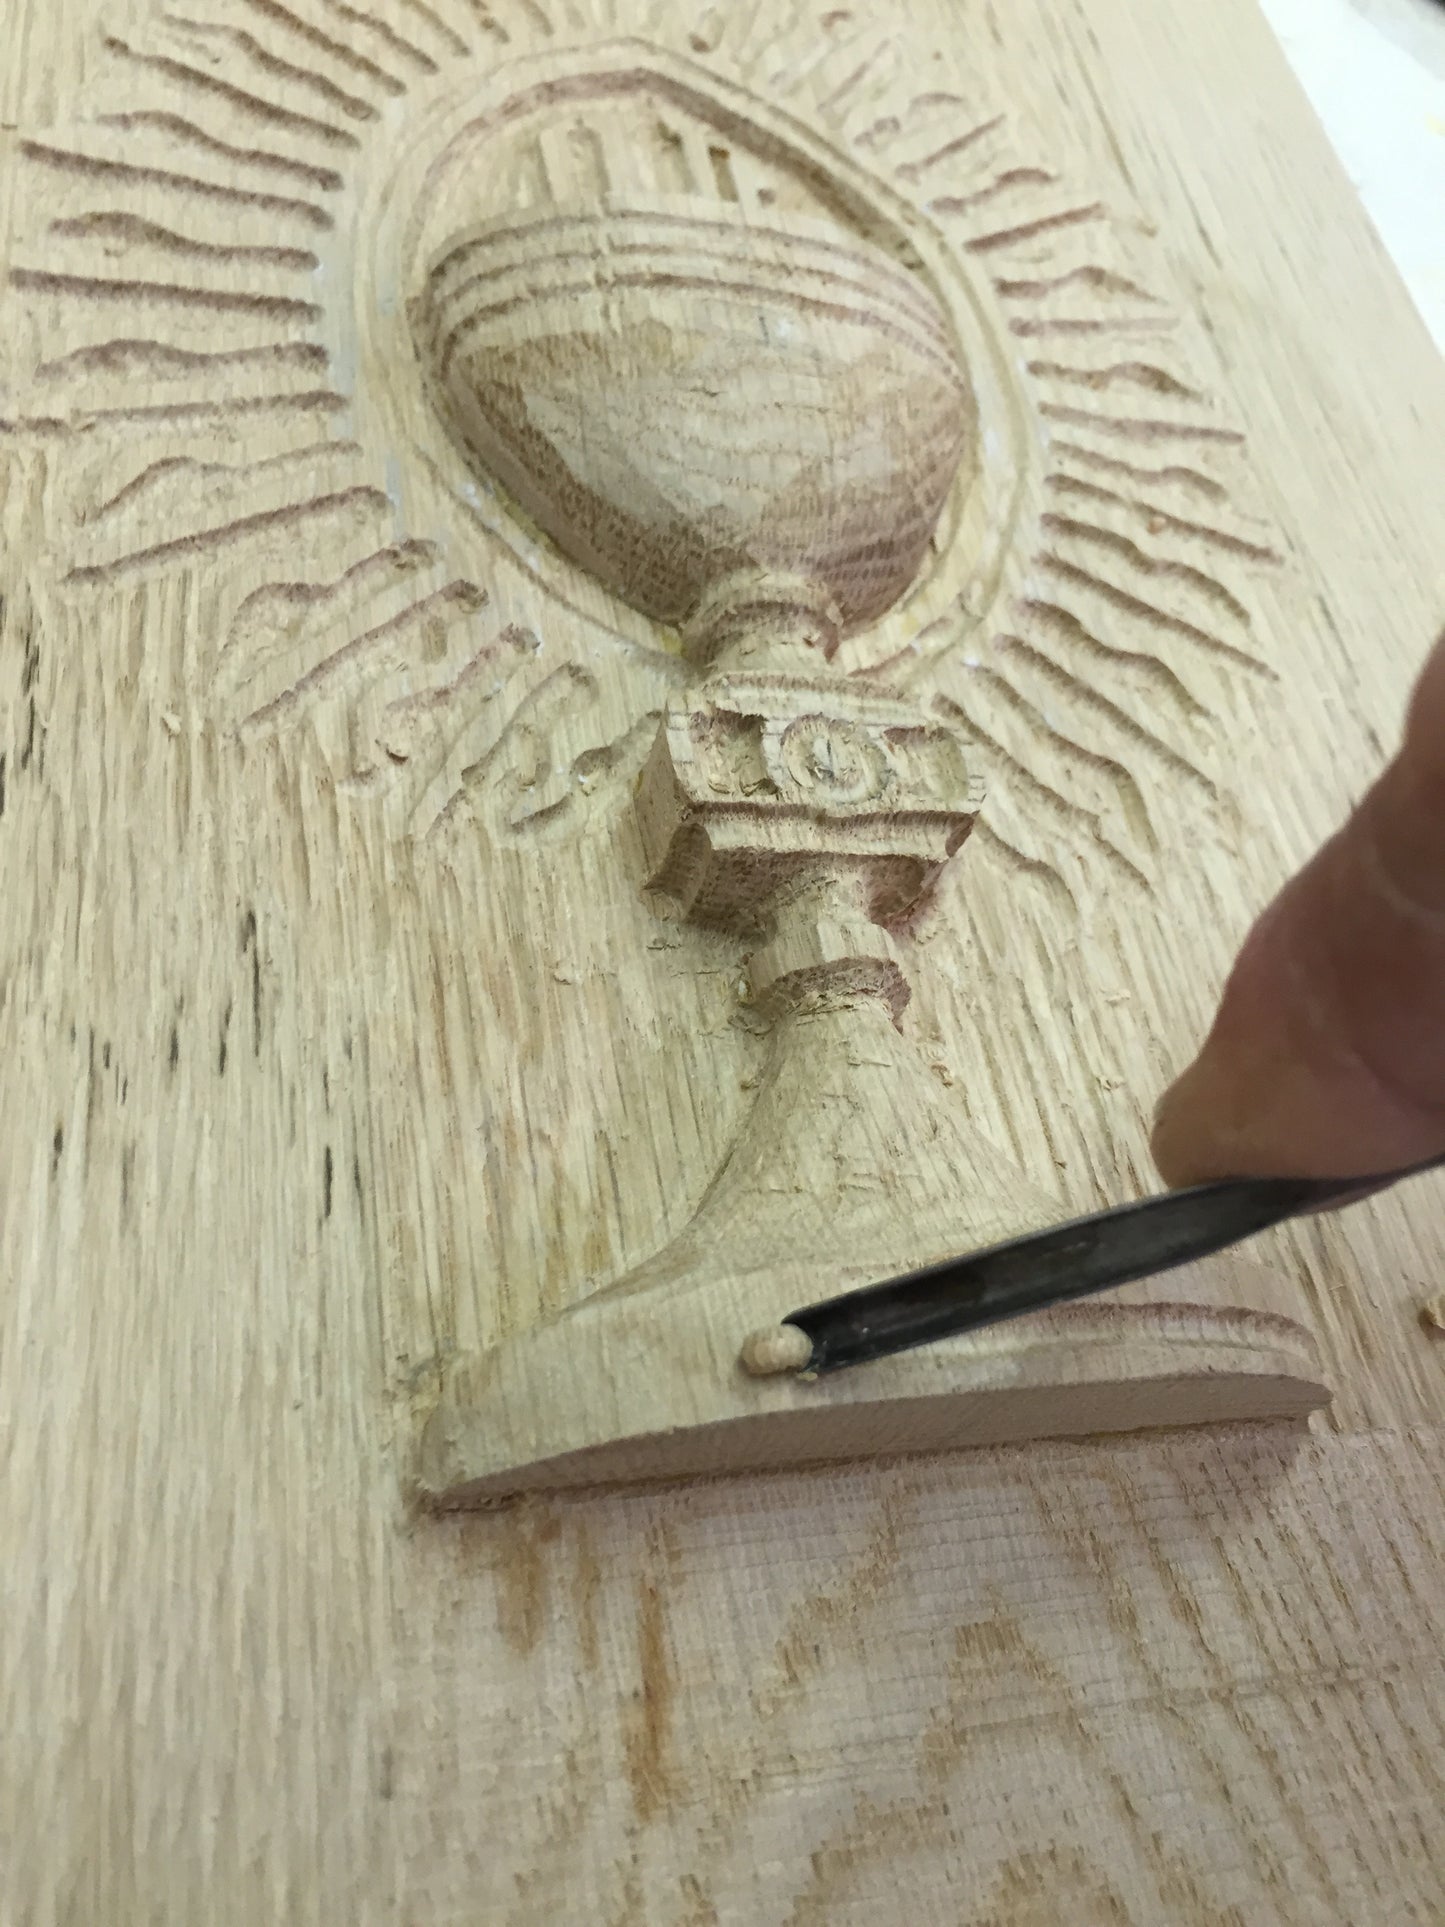 Carved wooden tabernacle